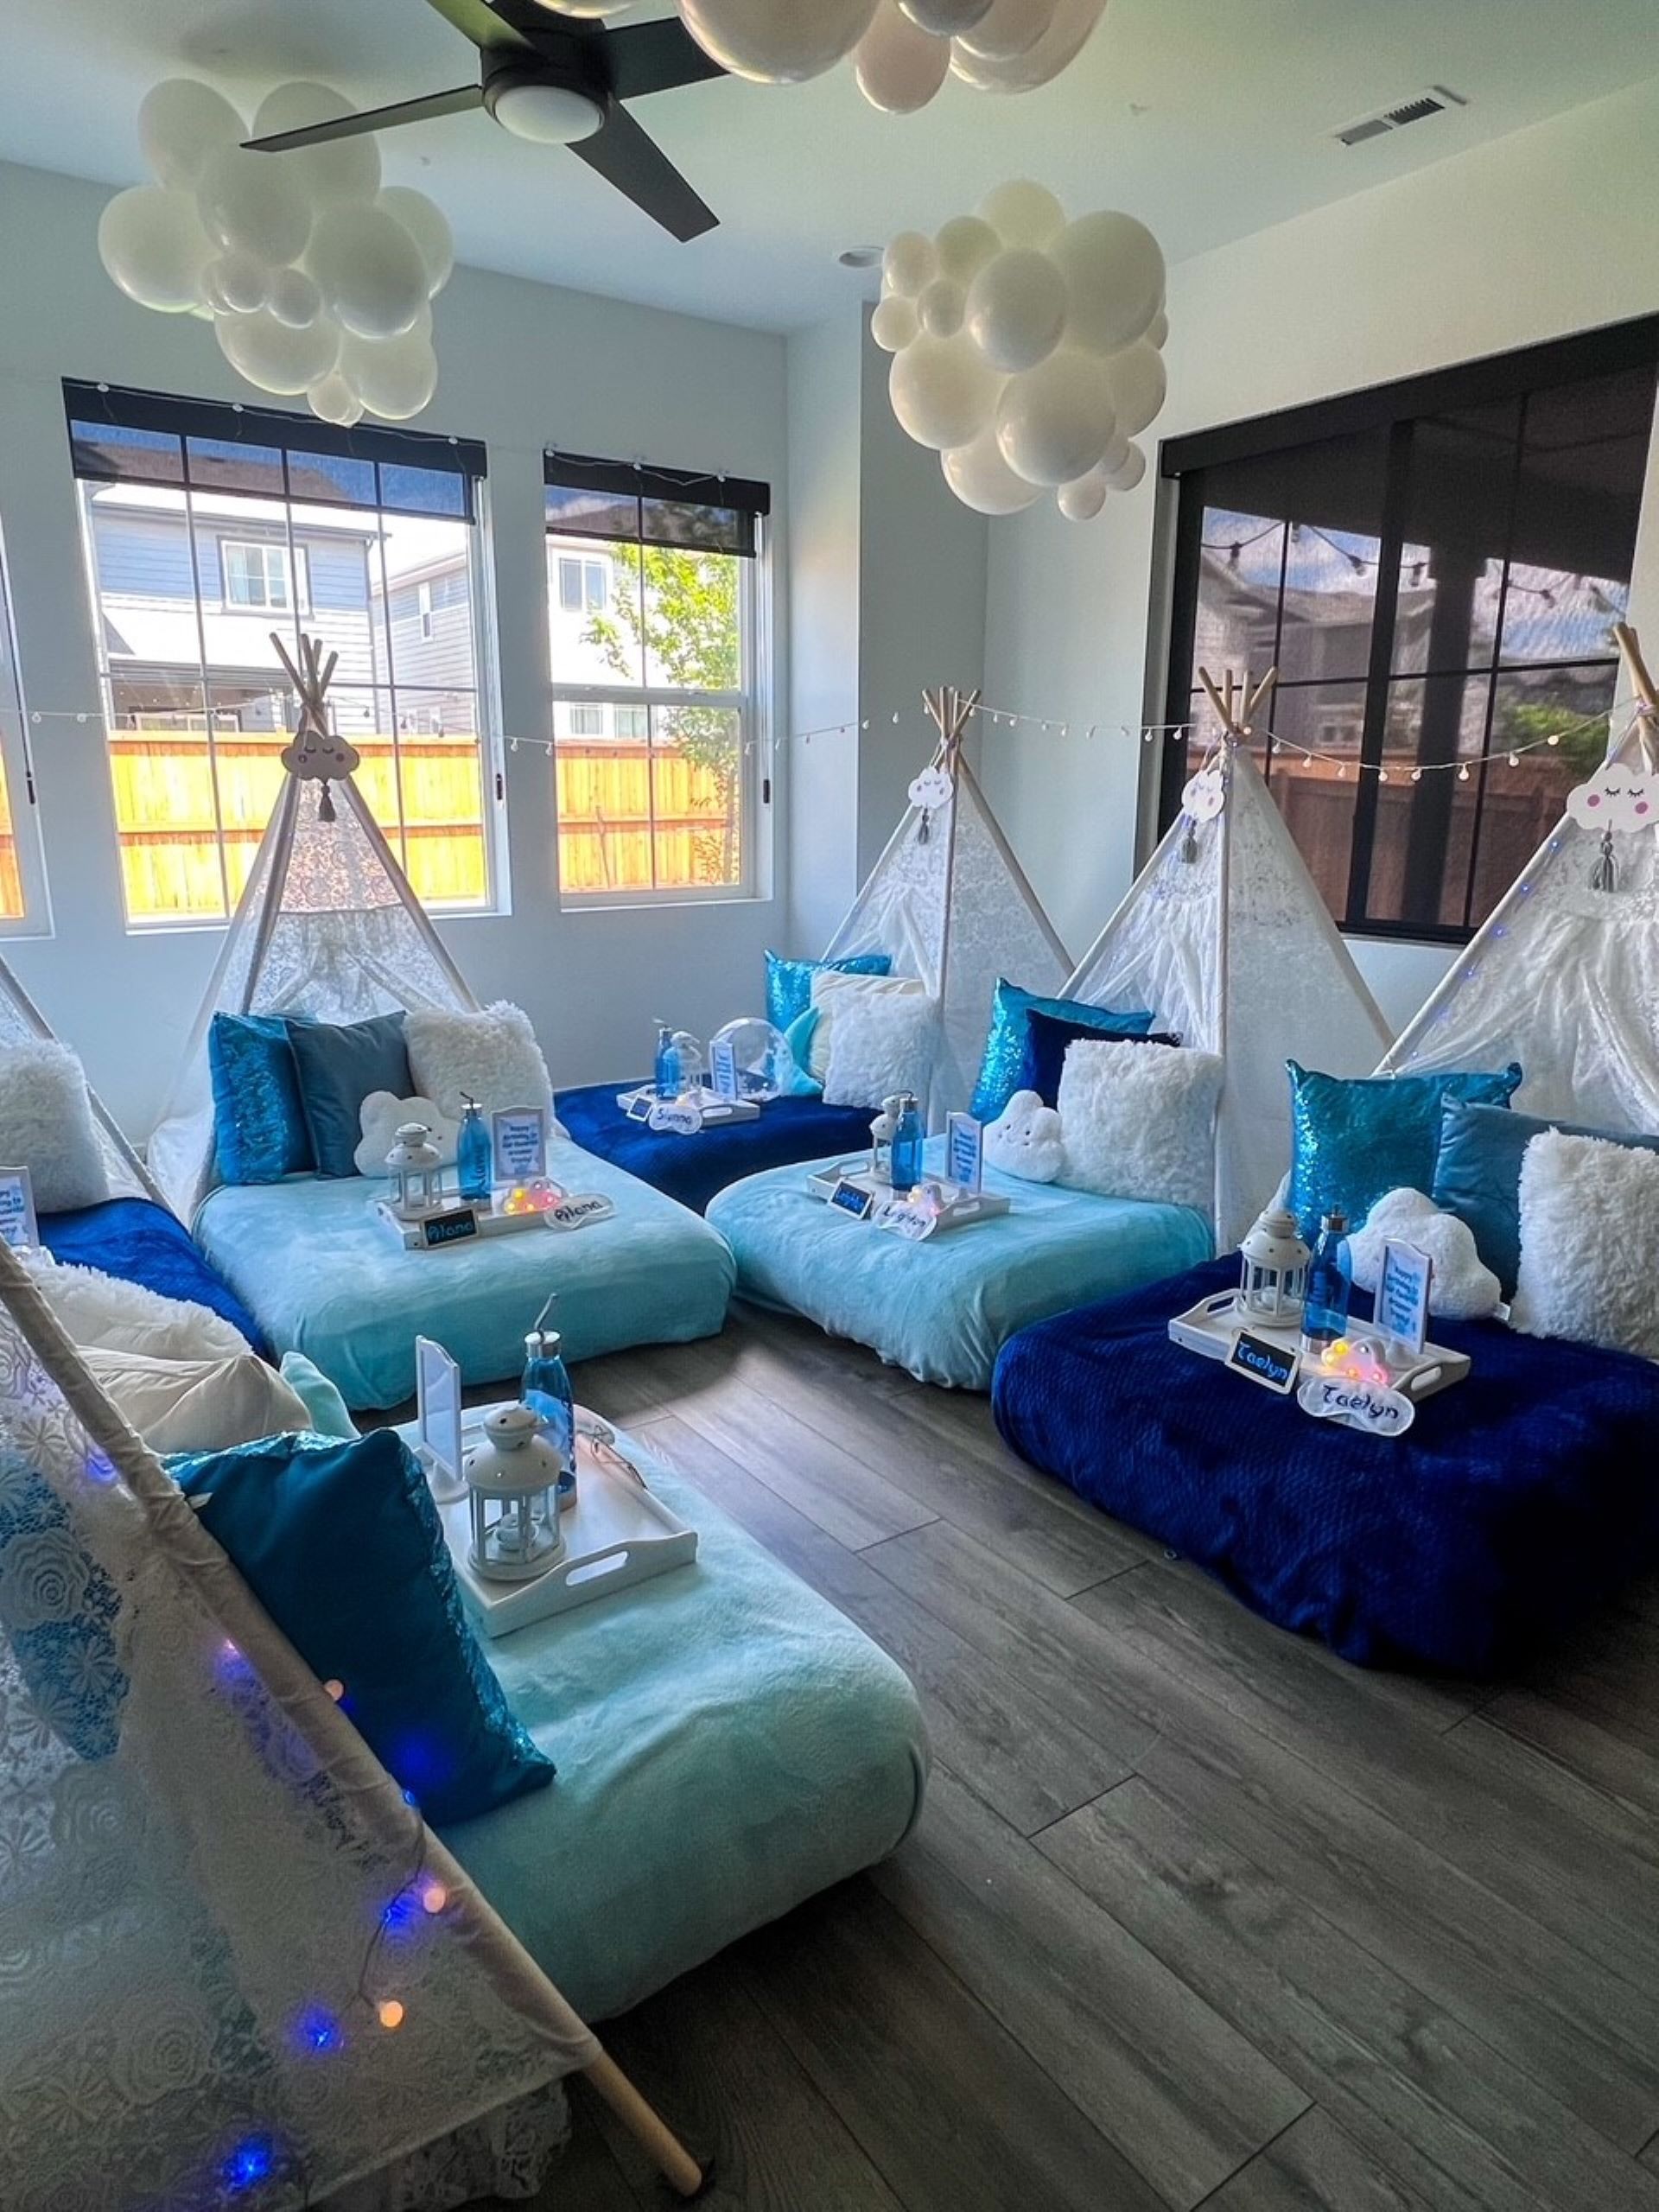 Floating on Cloud 9 Sleepover themed party